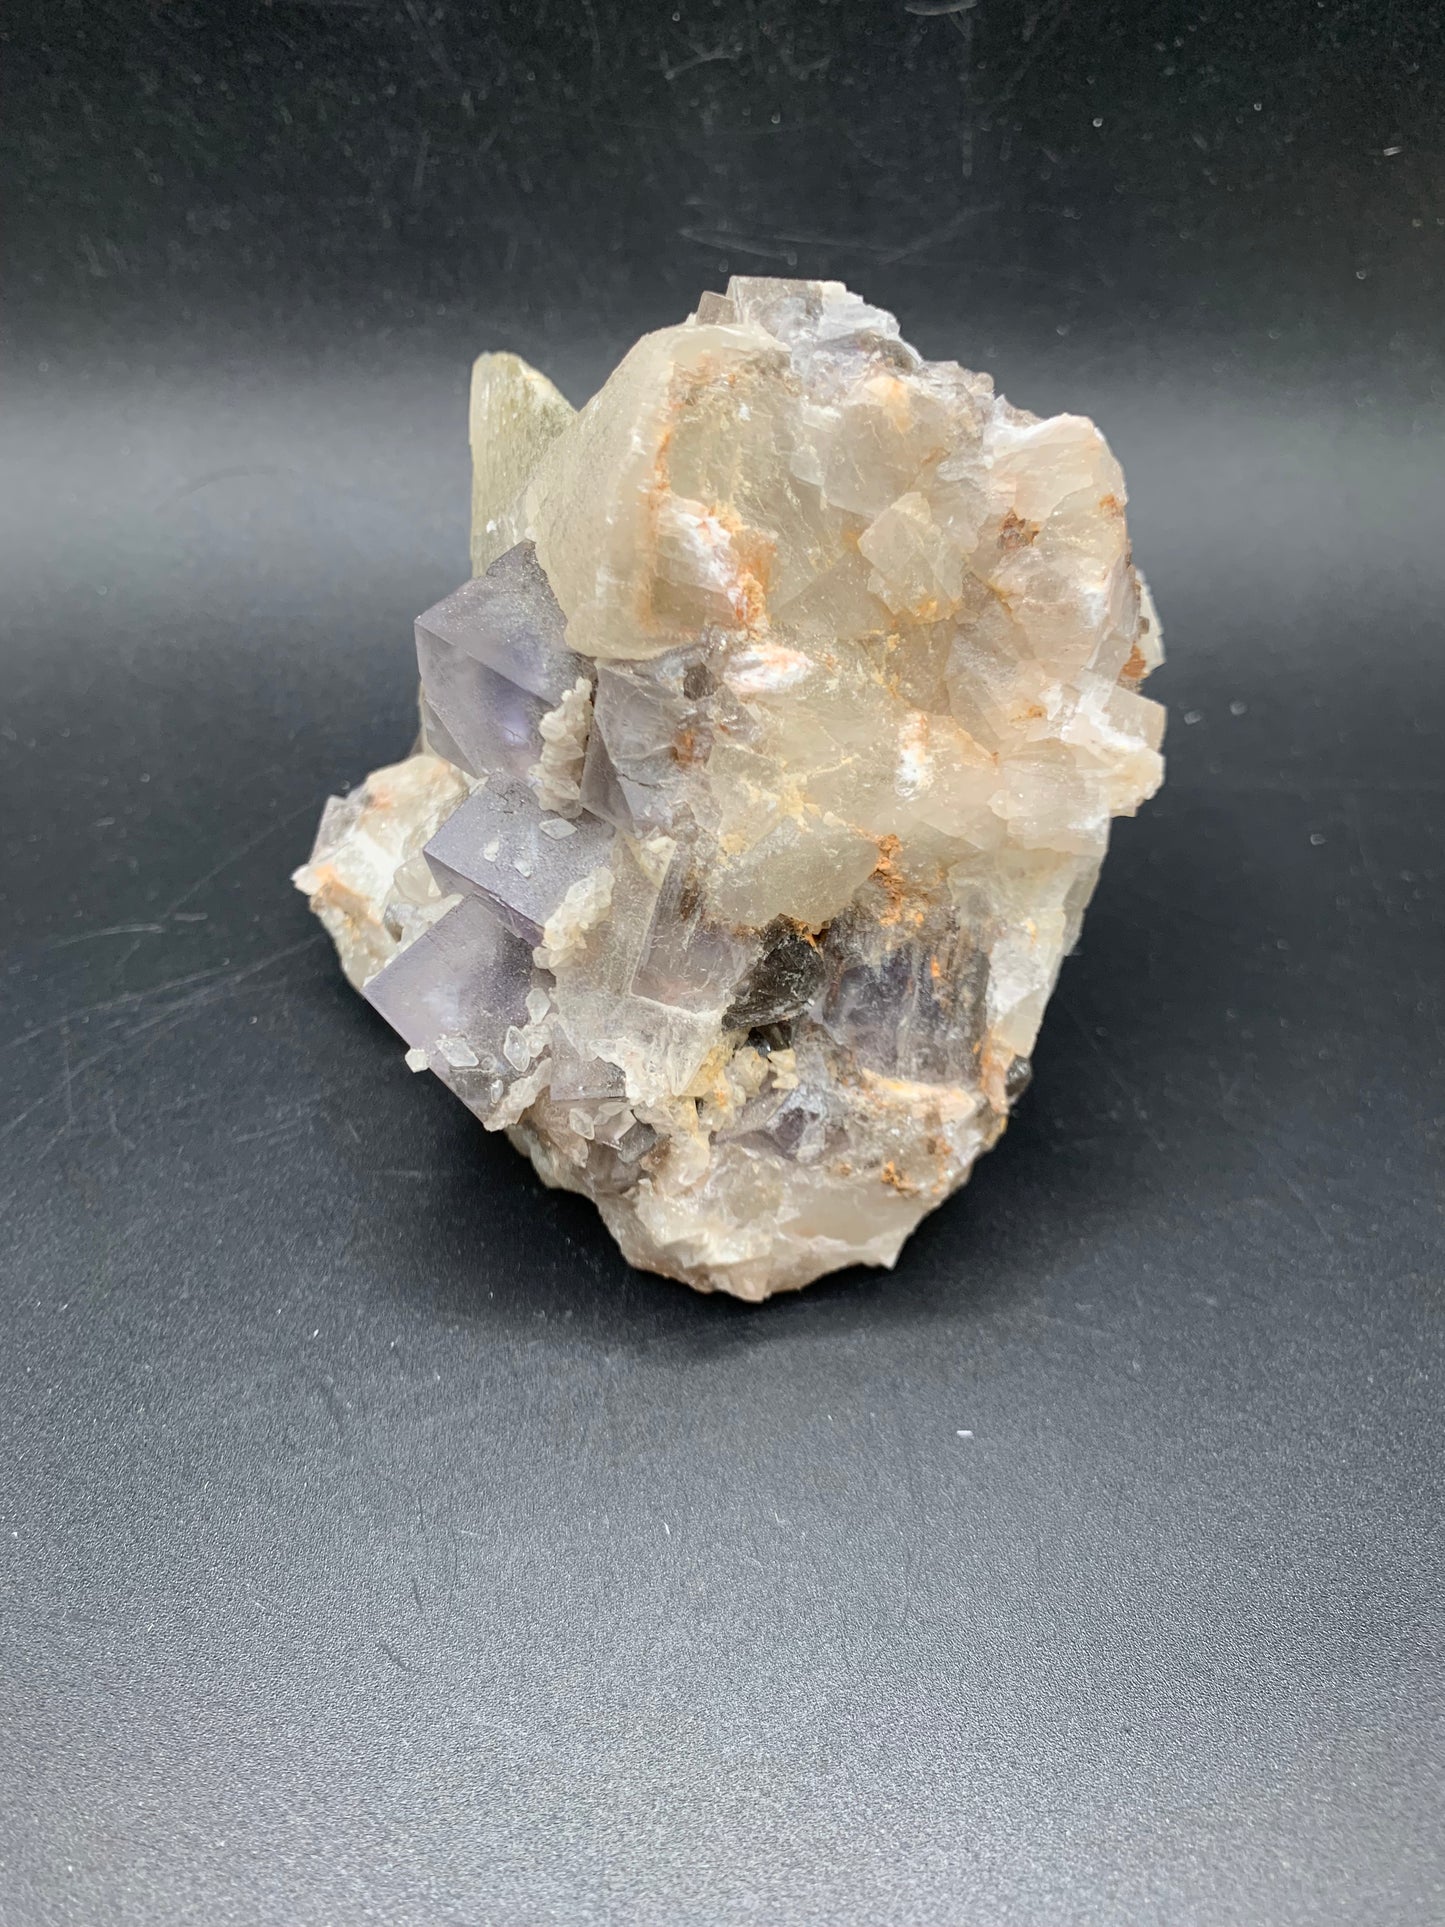 Dreamy Dogtooth Calcite and Fluorite